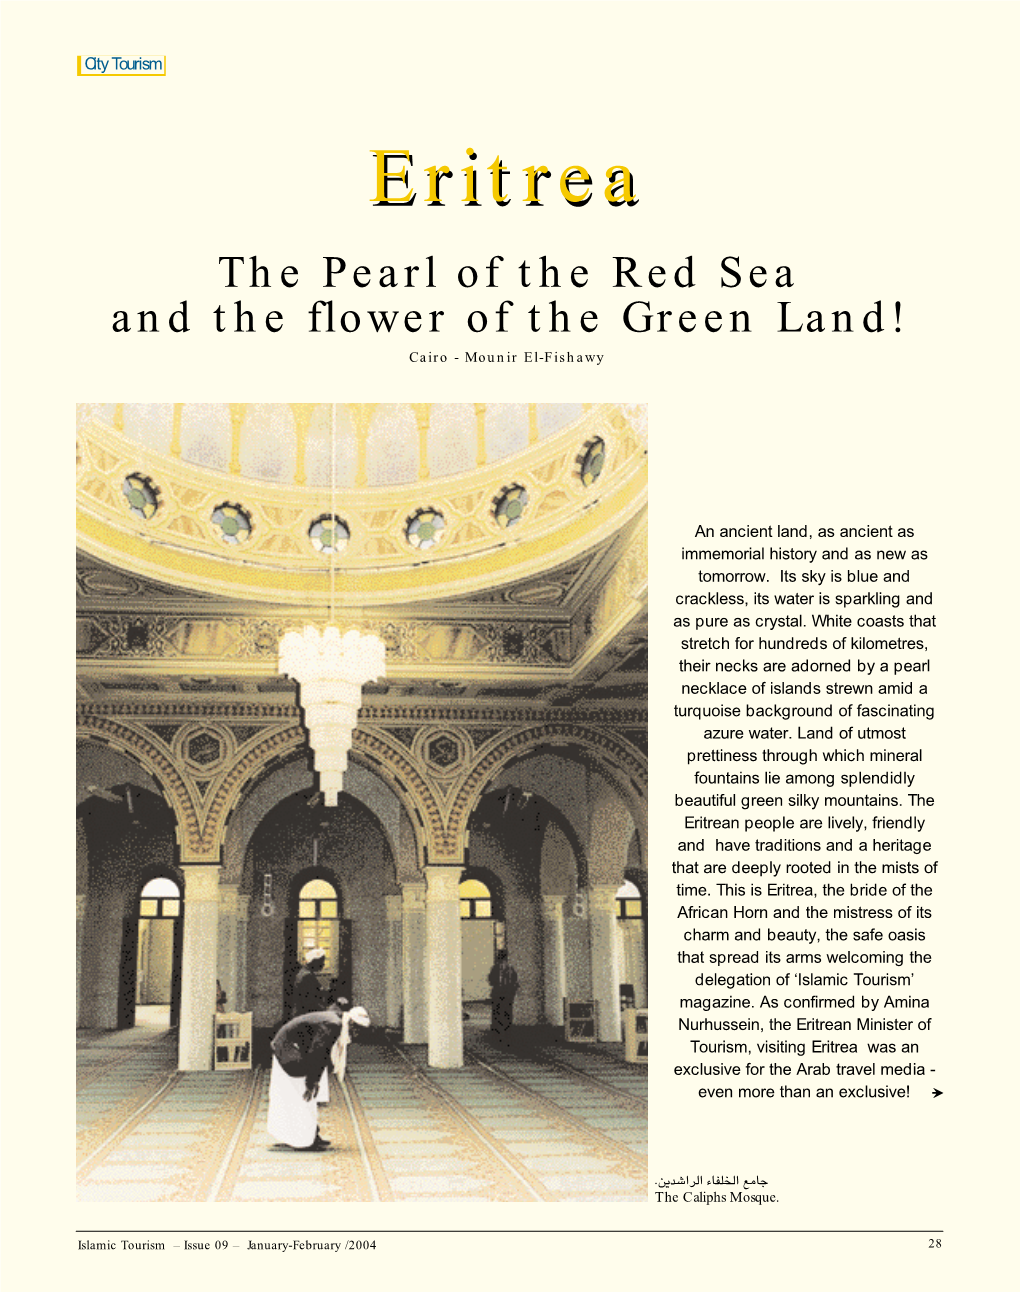 Eritreaeritrea the Pearl of the Red Sea and the Flower of the Green Land! Cairo - Mounir El-Fishawy